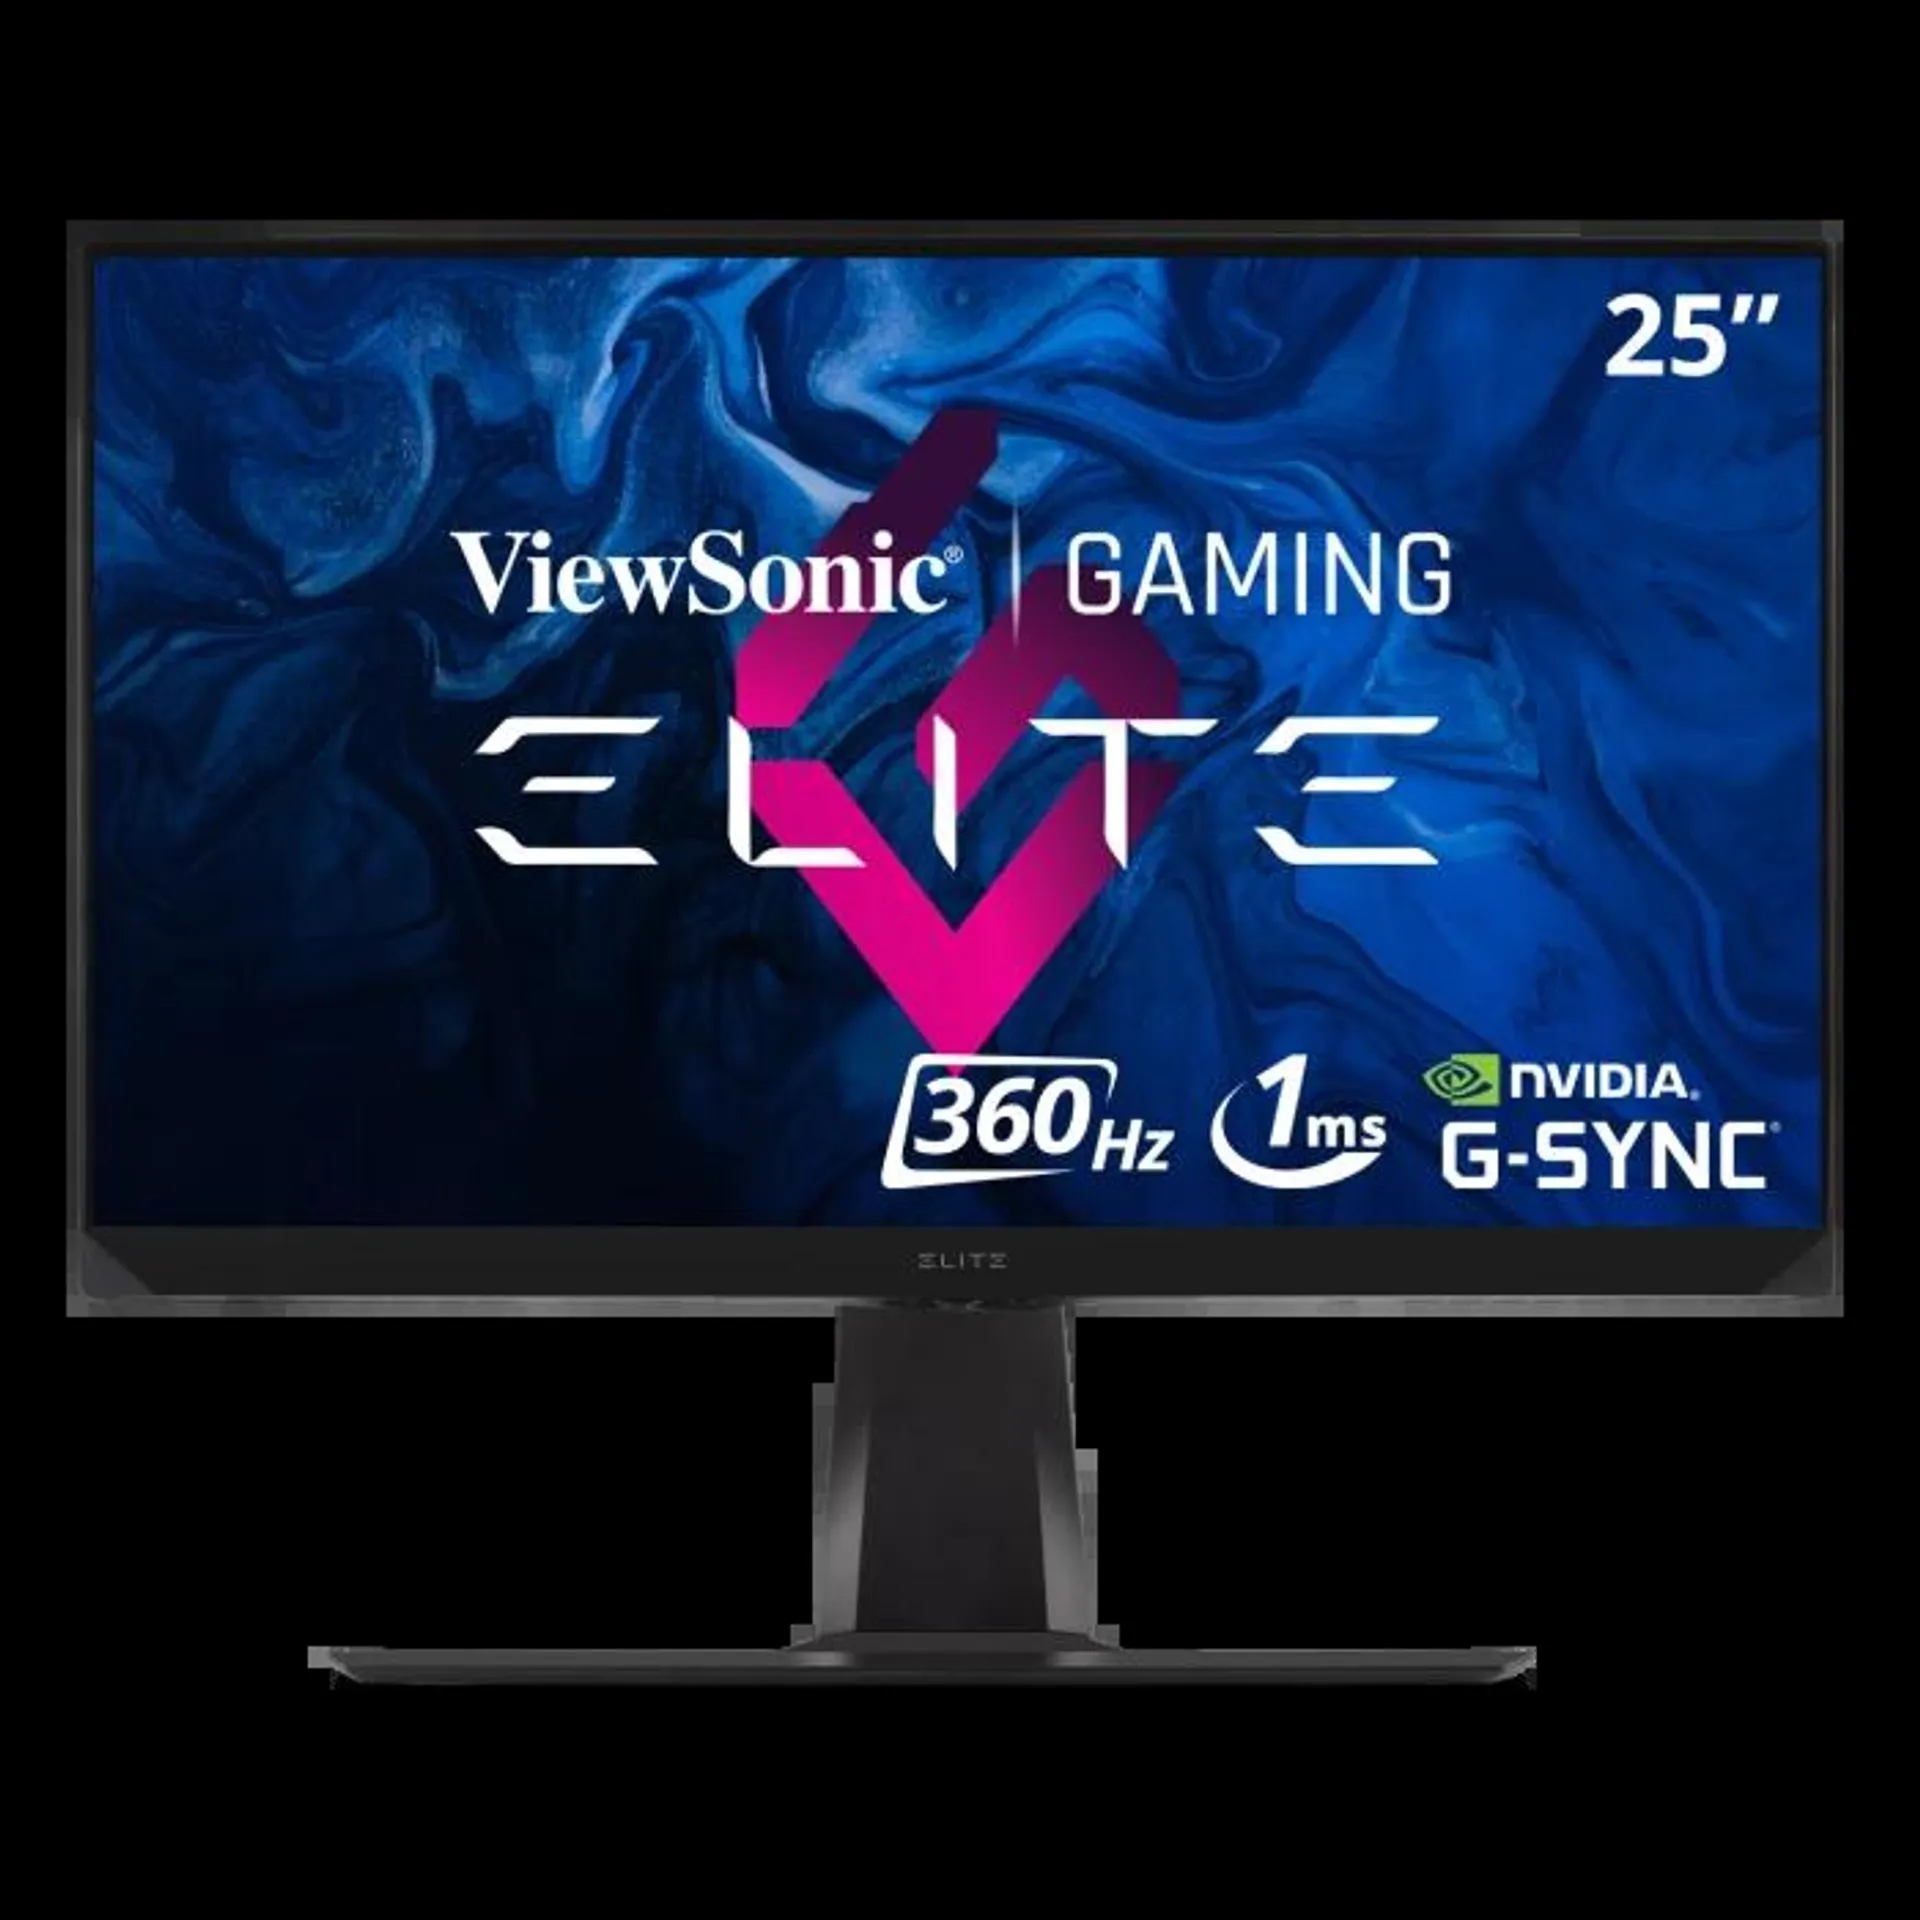 XG251G - 25" ELITE 1080p 1ms 360Hz IPS G-Sync Gaming Monitor with HDR400, and NVIDIA Reflex